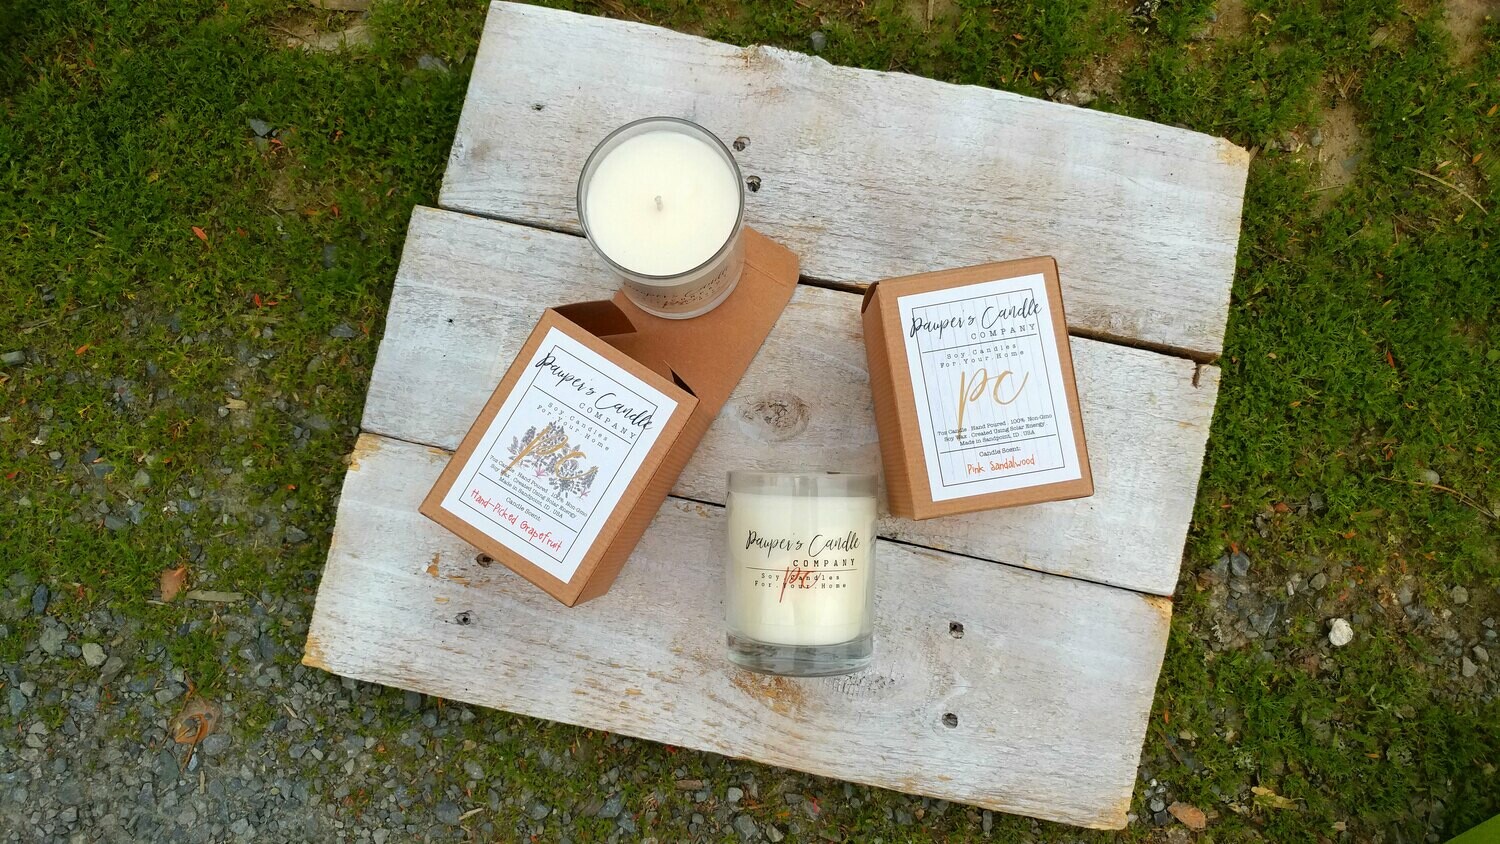 Enjoy Our New Summer Candle Scents